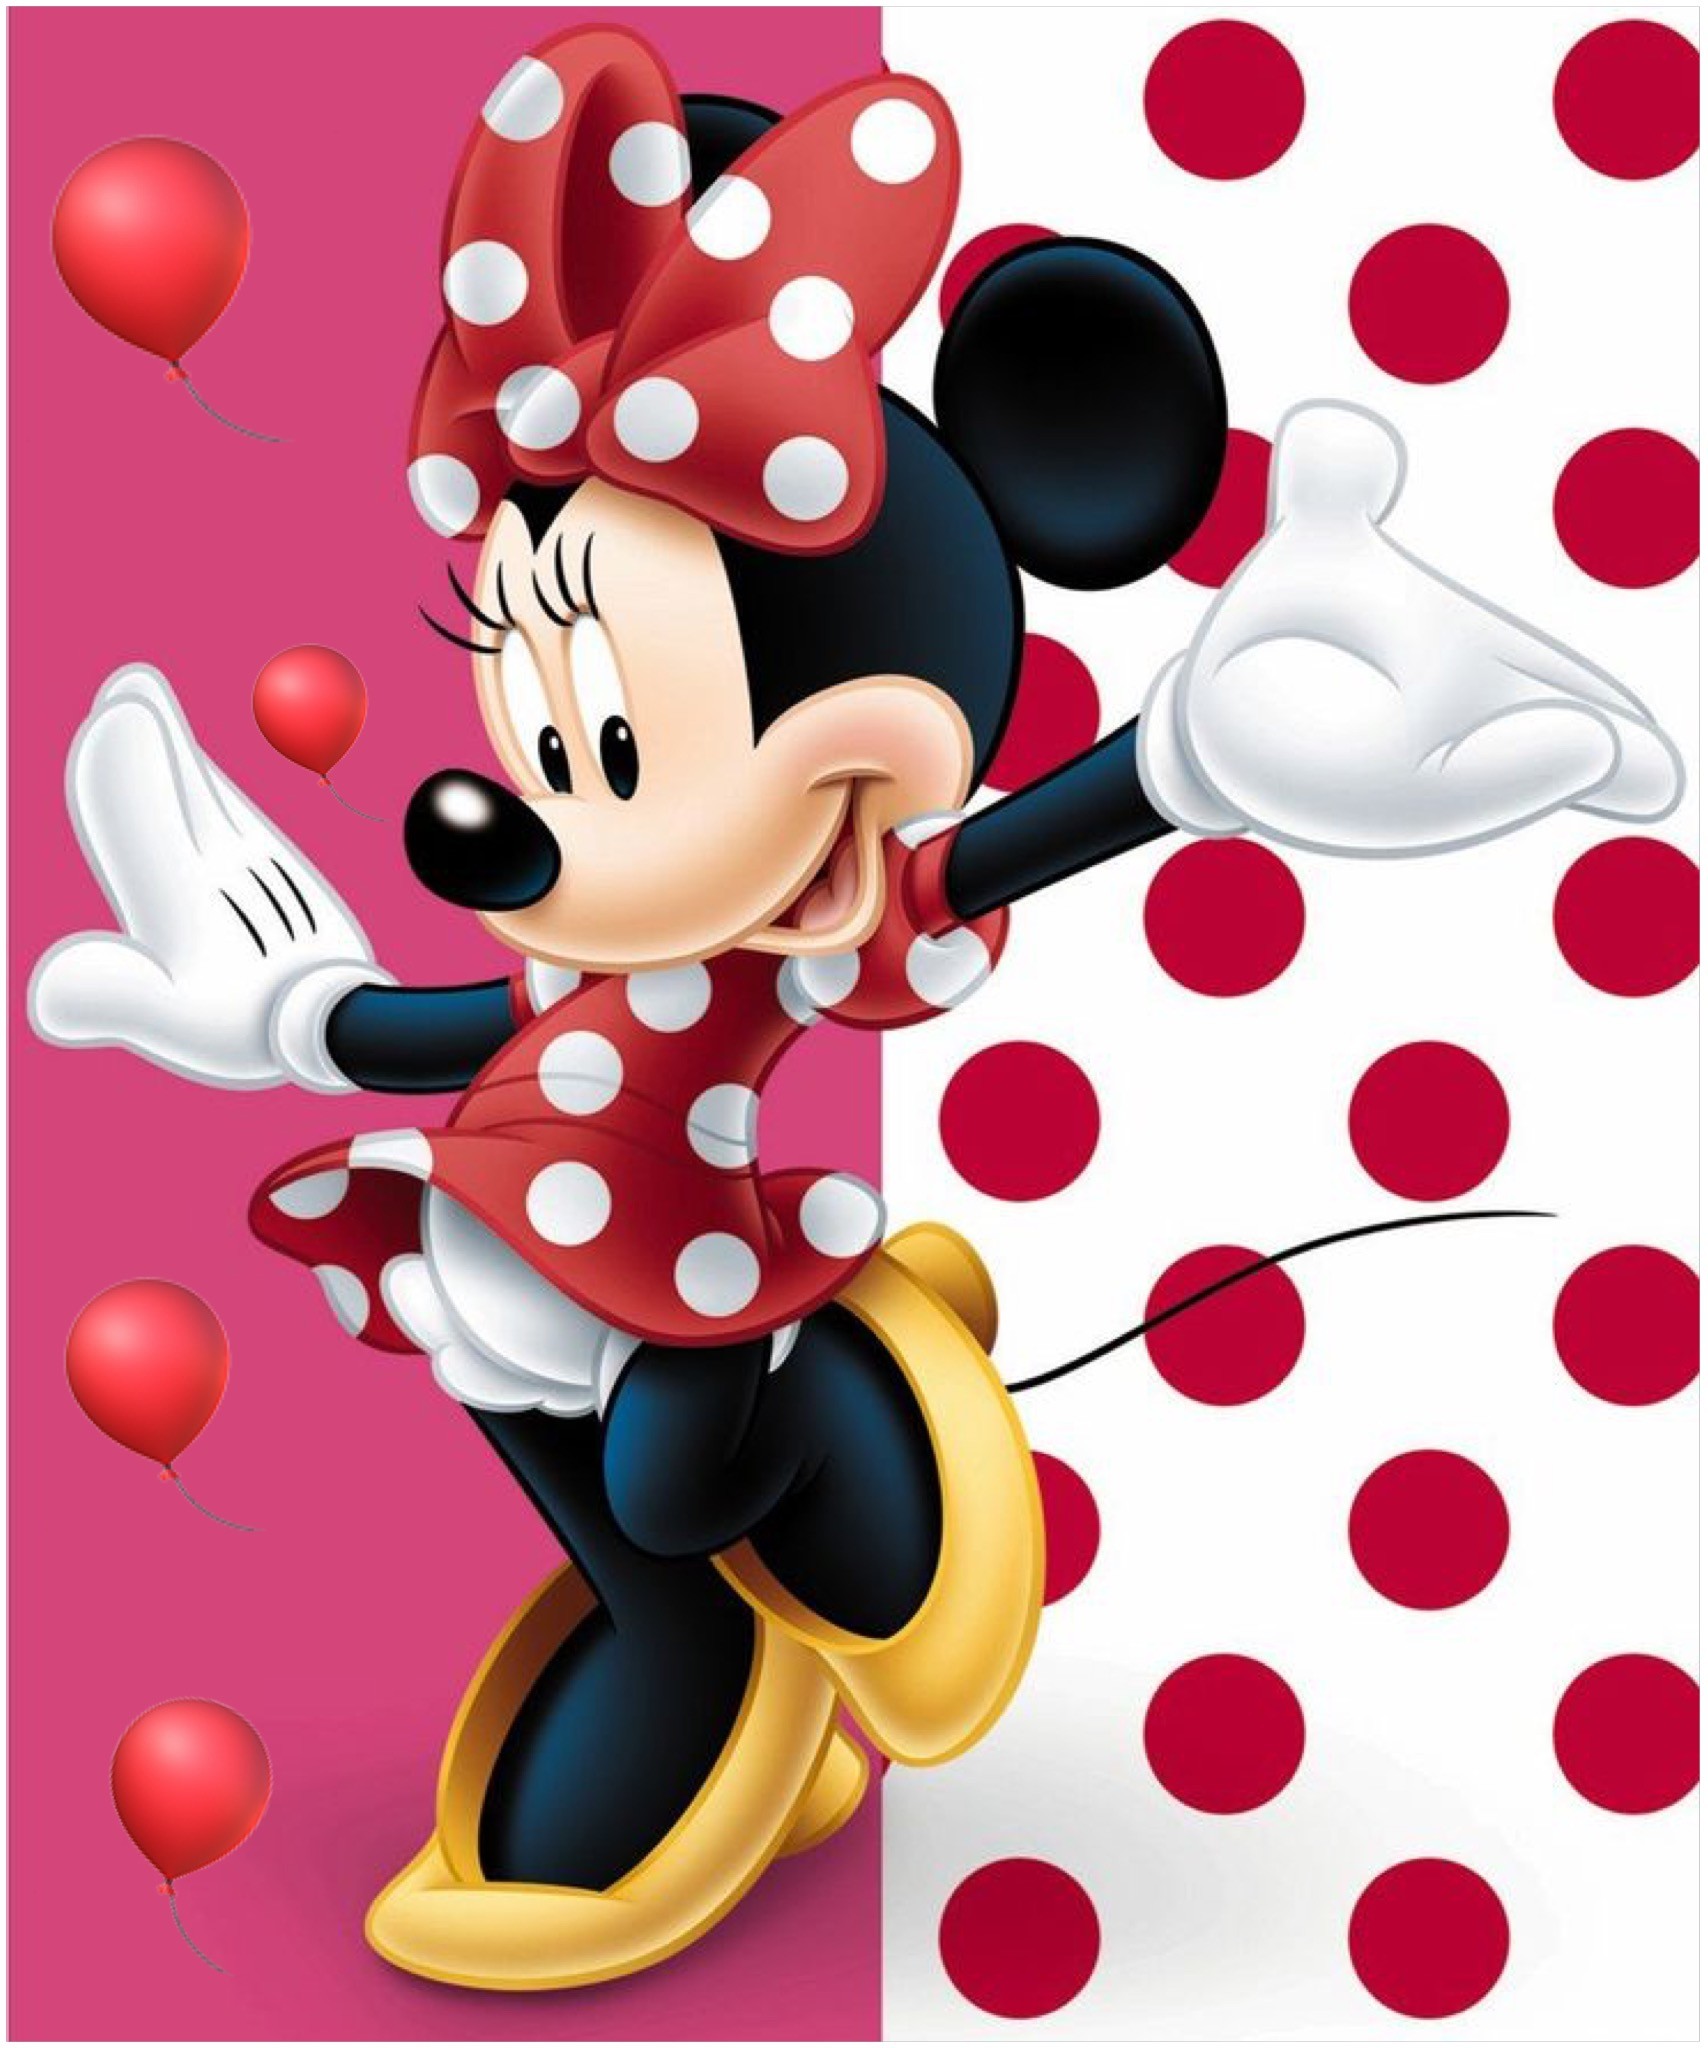 1708x2048 Mickey Minnie Mouse, Images Mignonnes, Minnie Mouse Pictures, Disney,  Wallpaper, Smartphone Hintergrund, Awesome Stuff, Stickers, Wallpapers